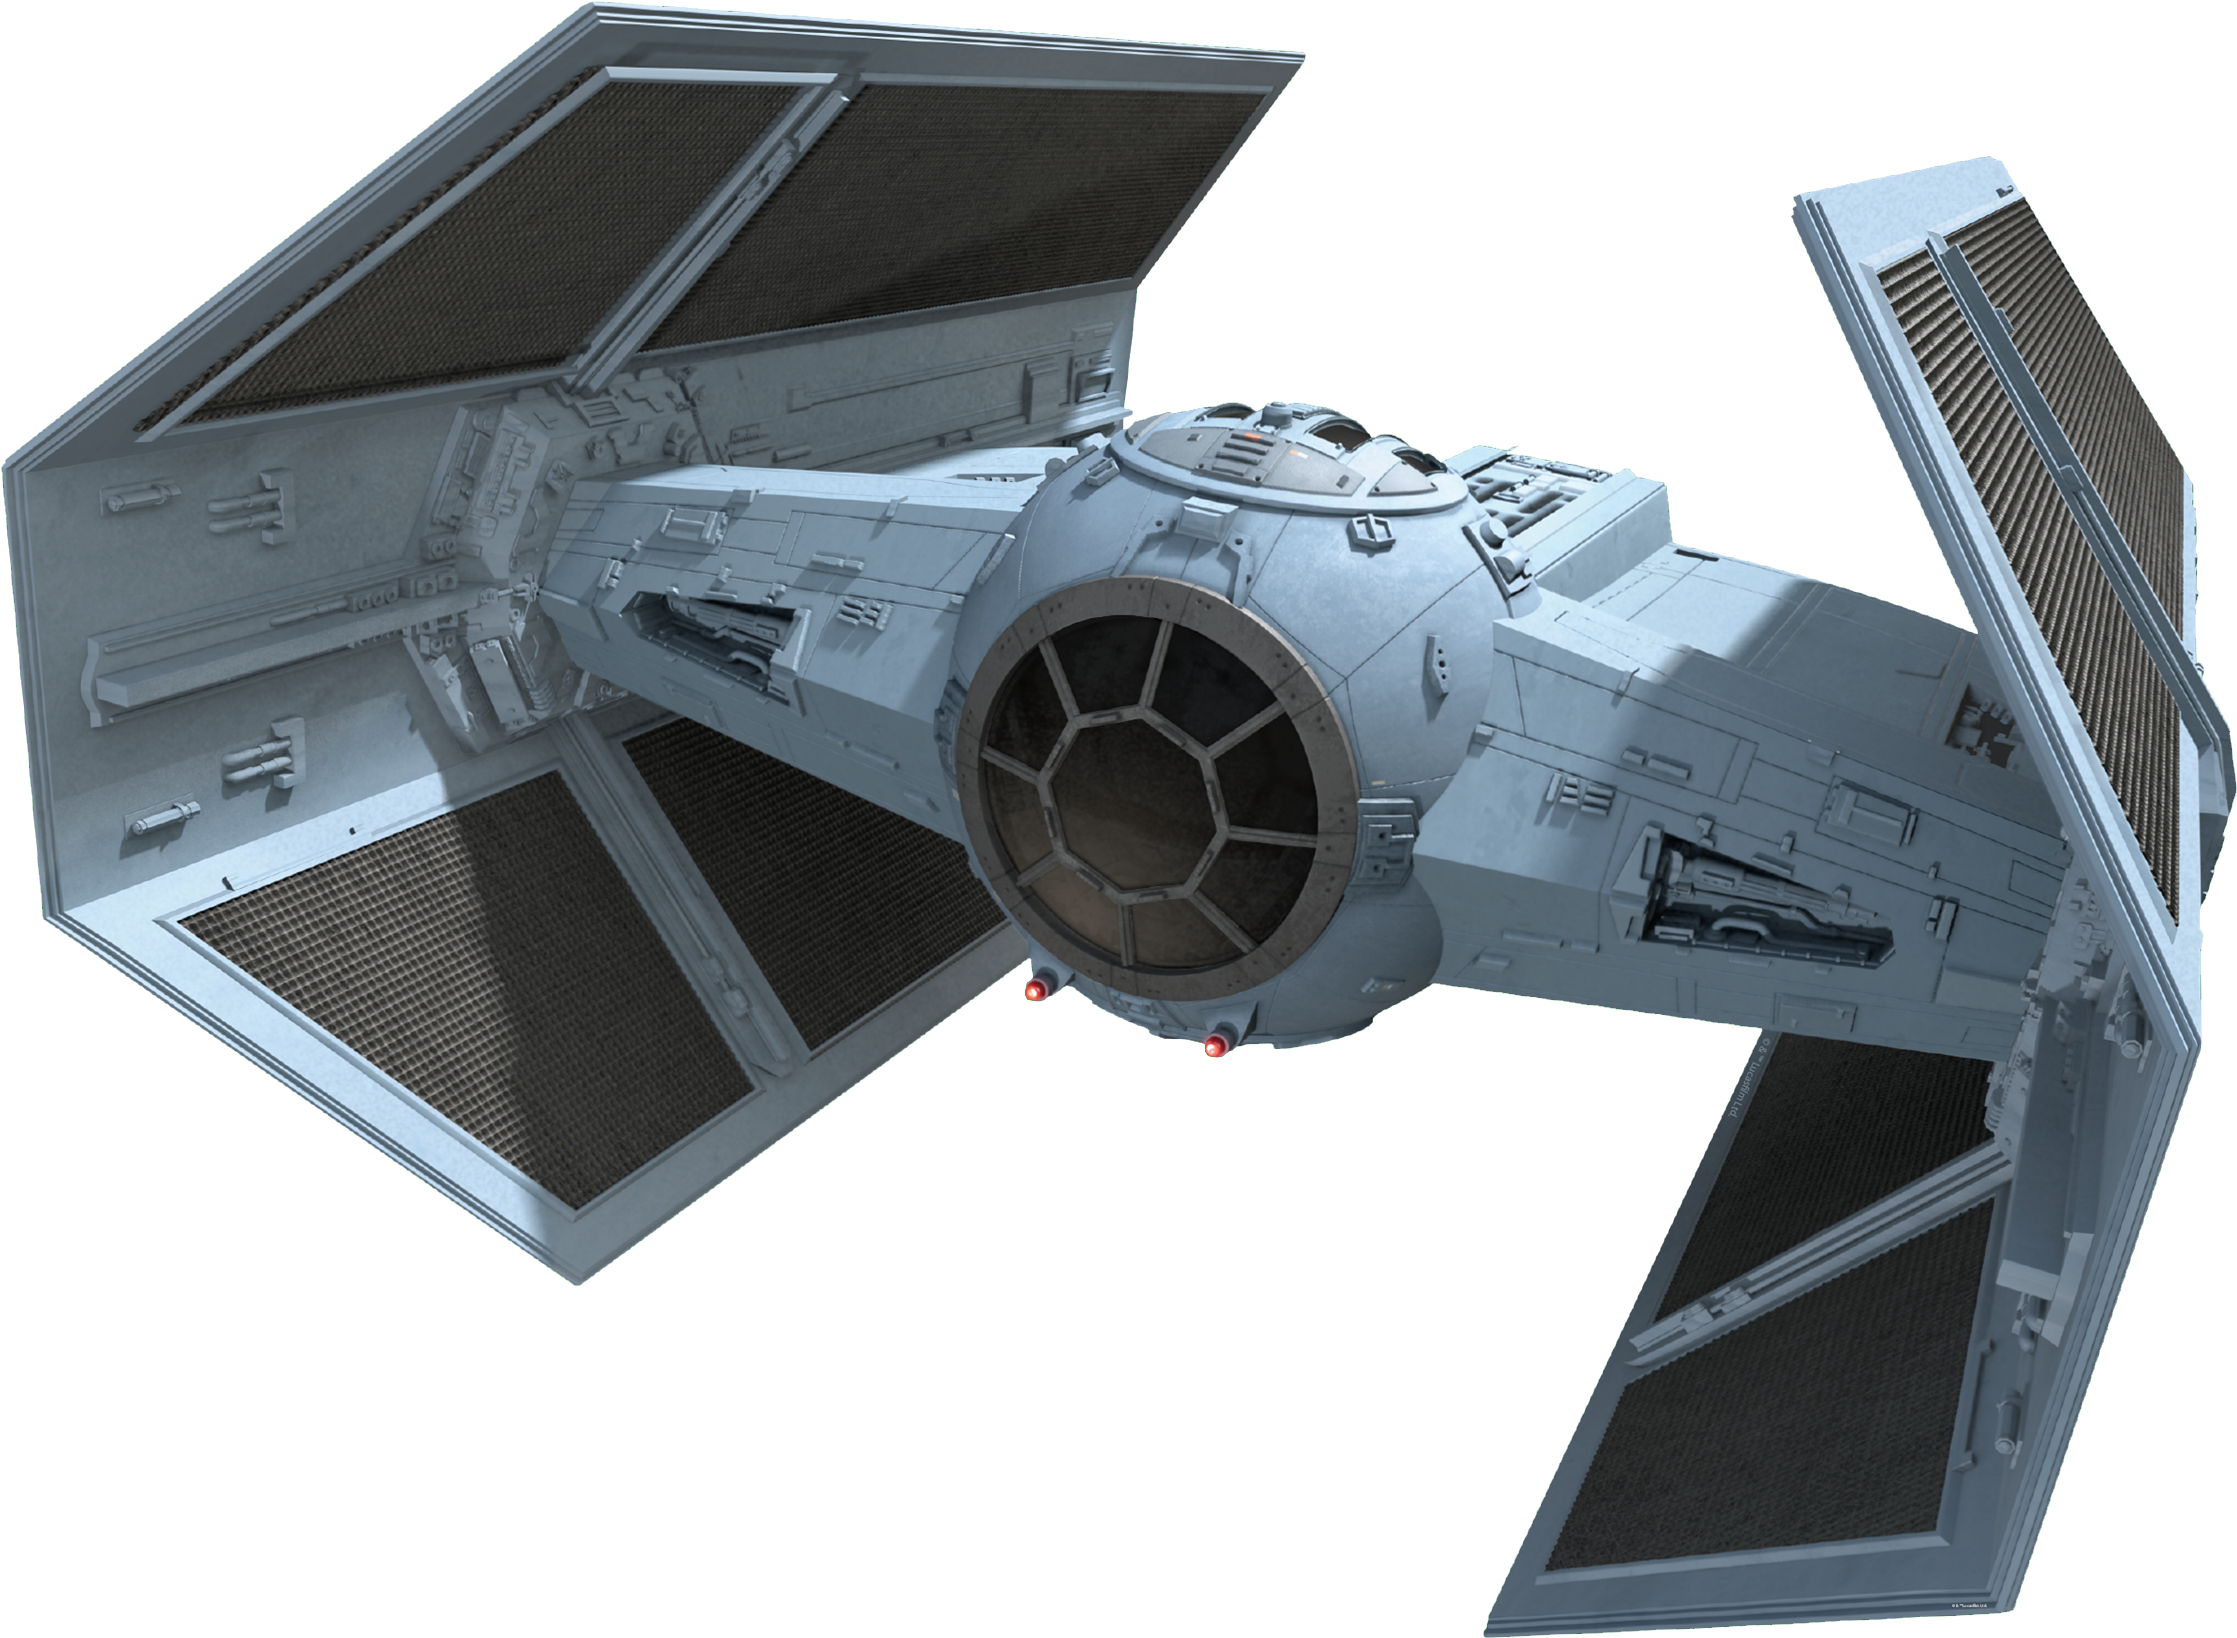 Image Image Image Image Interesting - Star Wars Tie Fighter Png Clipart -.....